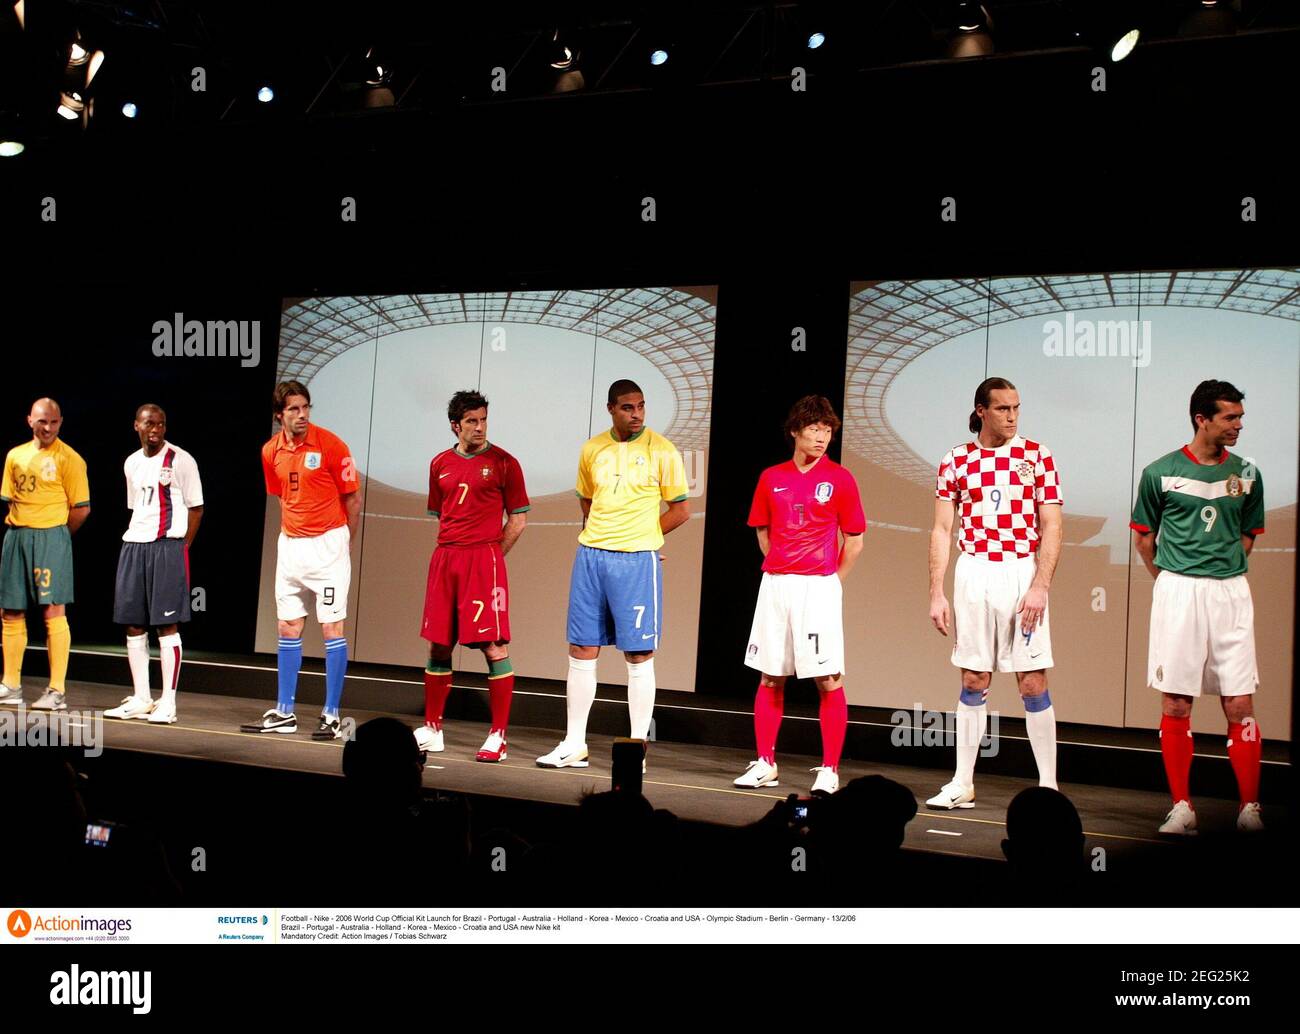 Football - Nike - 2006 World Cup Official Kit Launch for Brazil - Portugal - Australia - Holland - Korea - Mexico - Croatia and USA - Olympic Stadium - Berlin - Germany - 13/2/06  Brazil - Portugal - Australia - Holland - Korea - Mexico - Croatia and USA new Nike kit  Mandatory Credit: Action Images / Tobias Schwarz Stock Photo